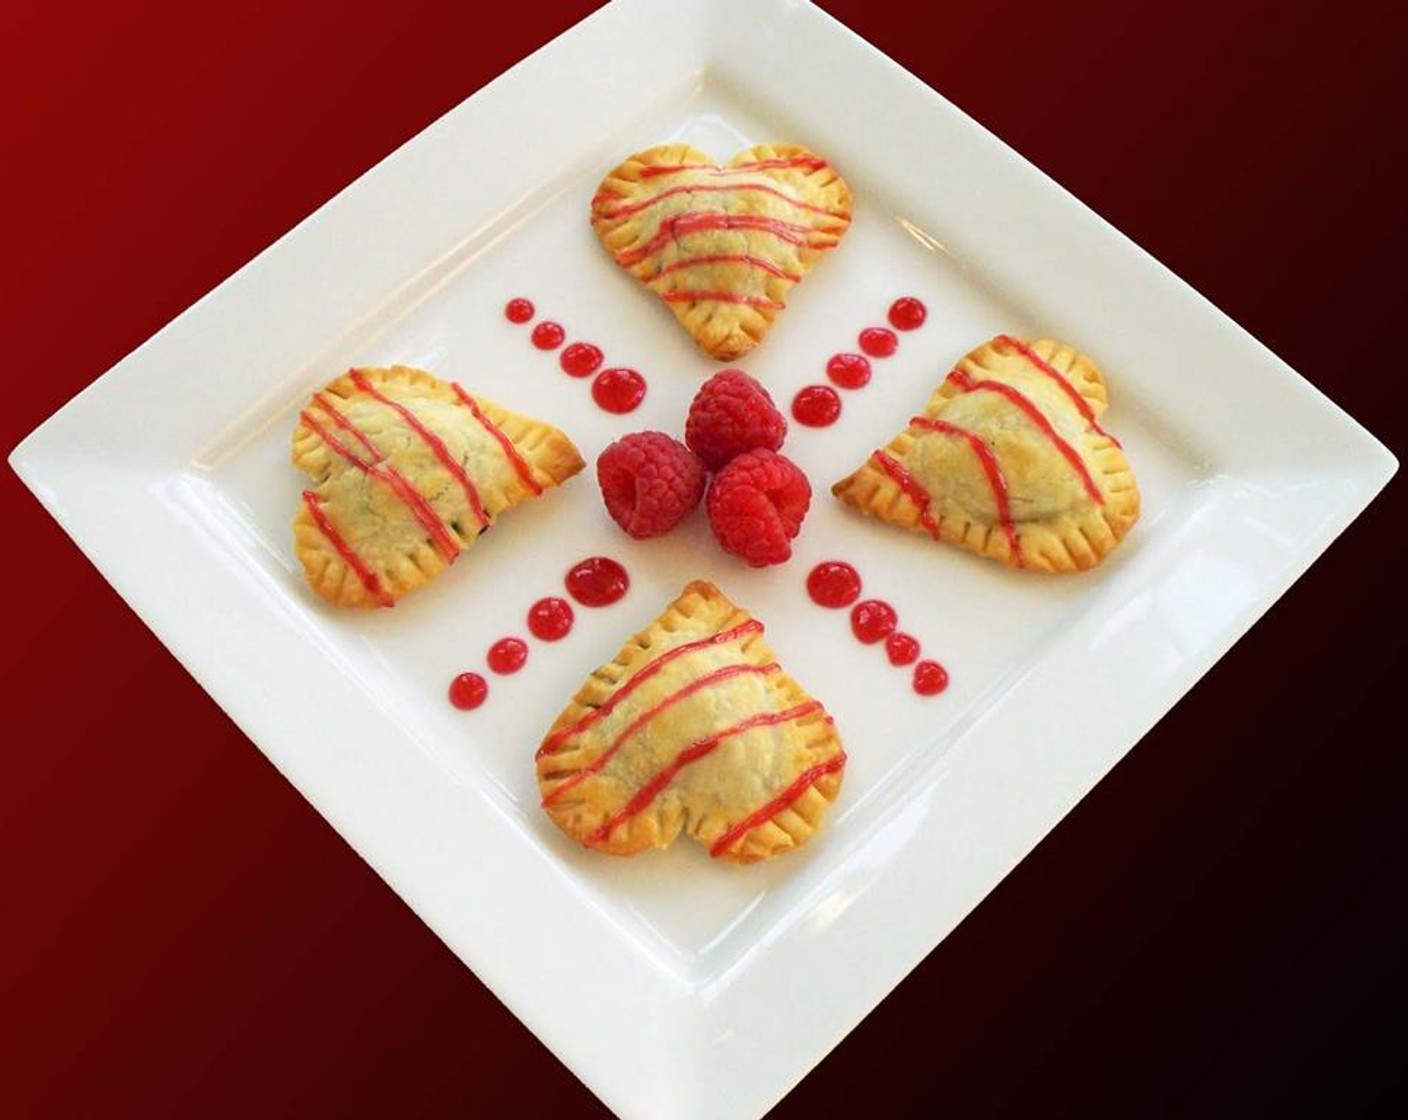 step 9 Arrange chocolate ravioli hearts on a dessert plate and drizzle with raspberries preserves. Add some fresh Fresh Raspberries (15) and serve while the ravioli are warm.